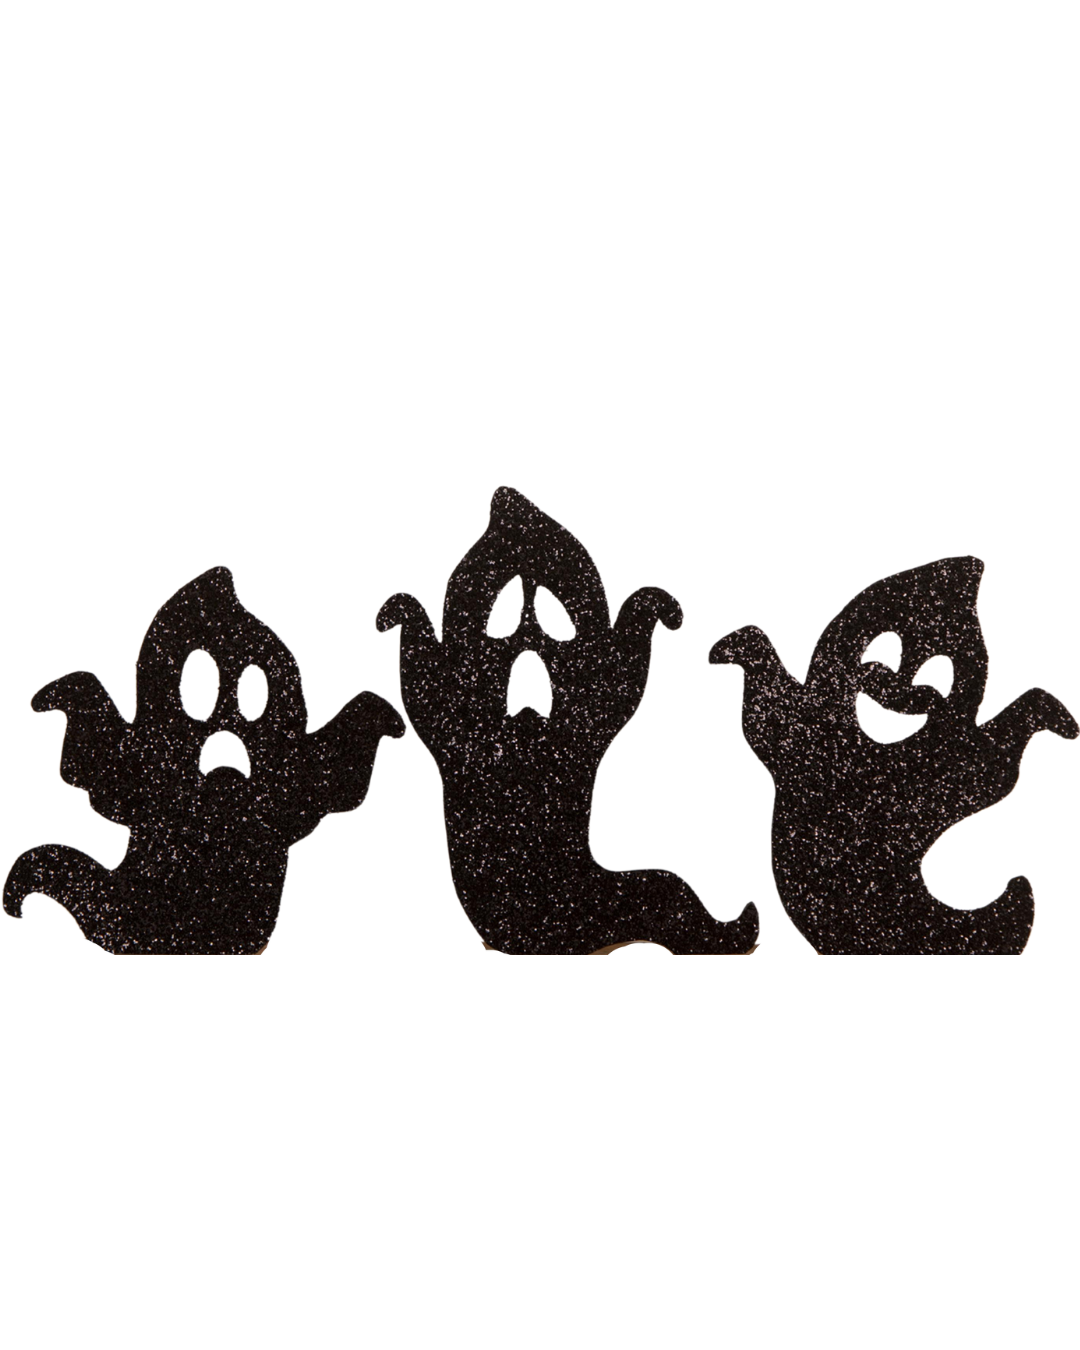 Ghoulish Ghost Silhouette in Black Set of 3